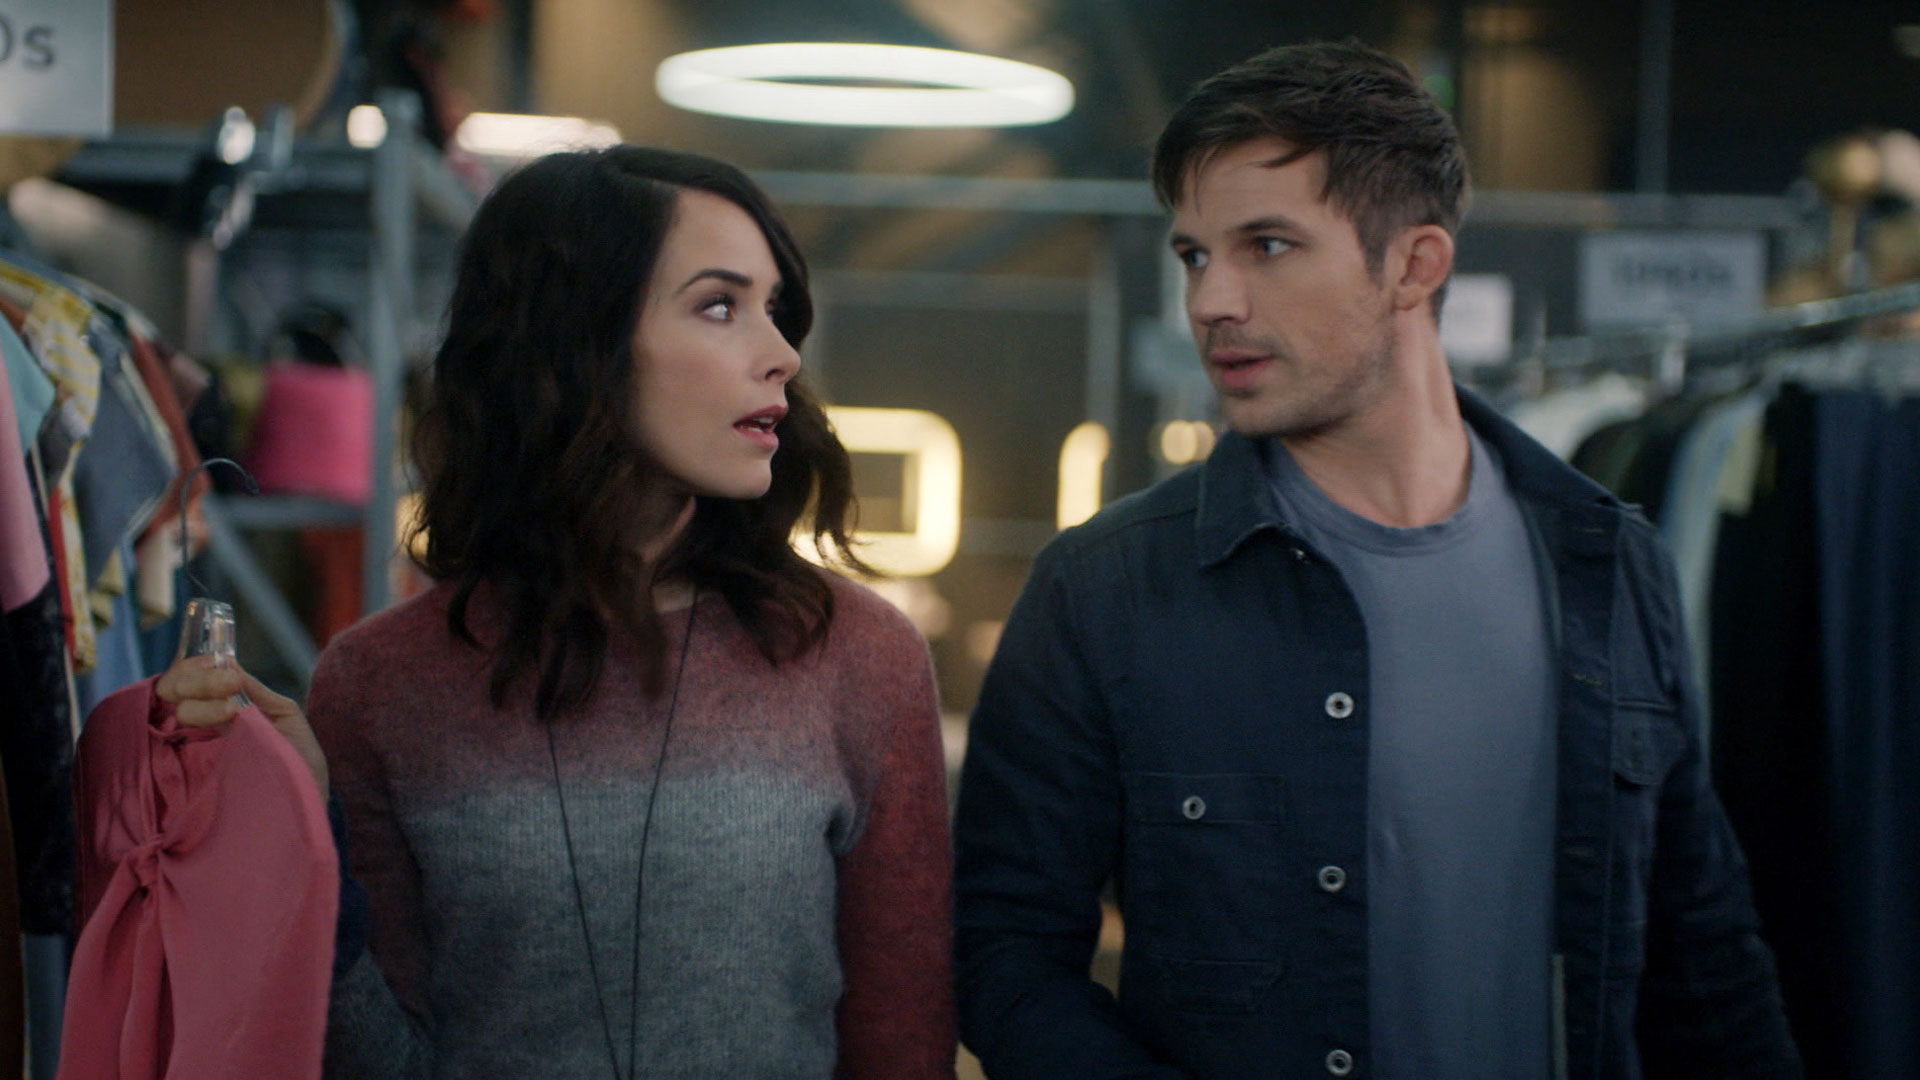 Watch Timeless Highlight: Will One Kiss Change Everything? - NBC.com